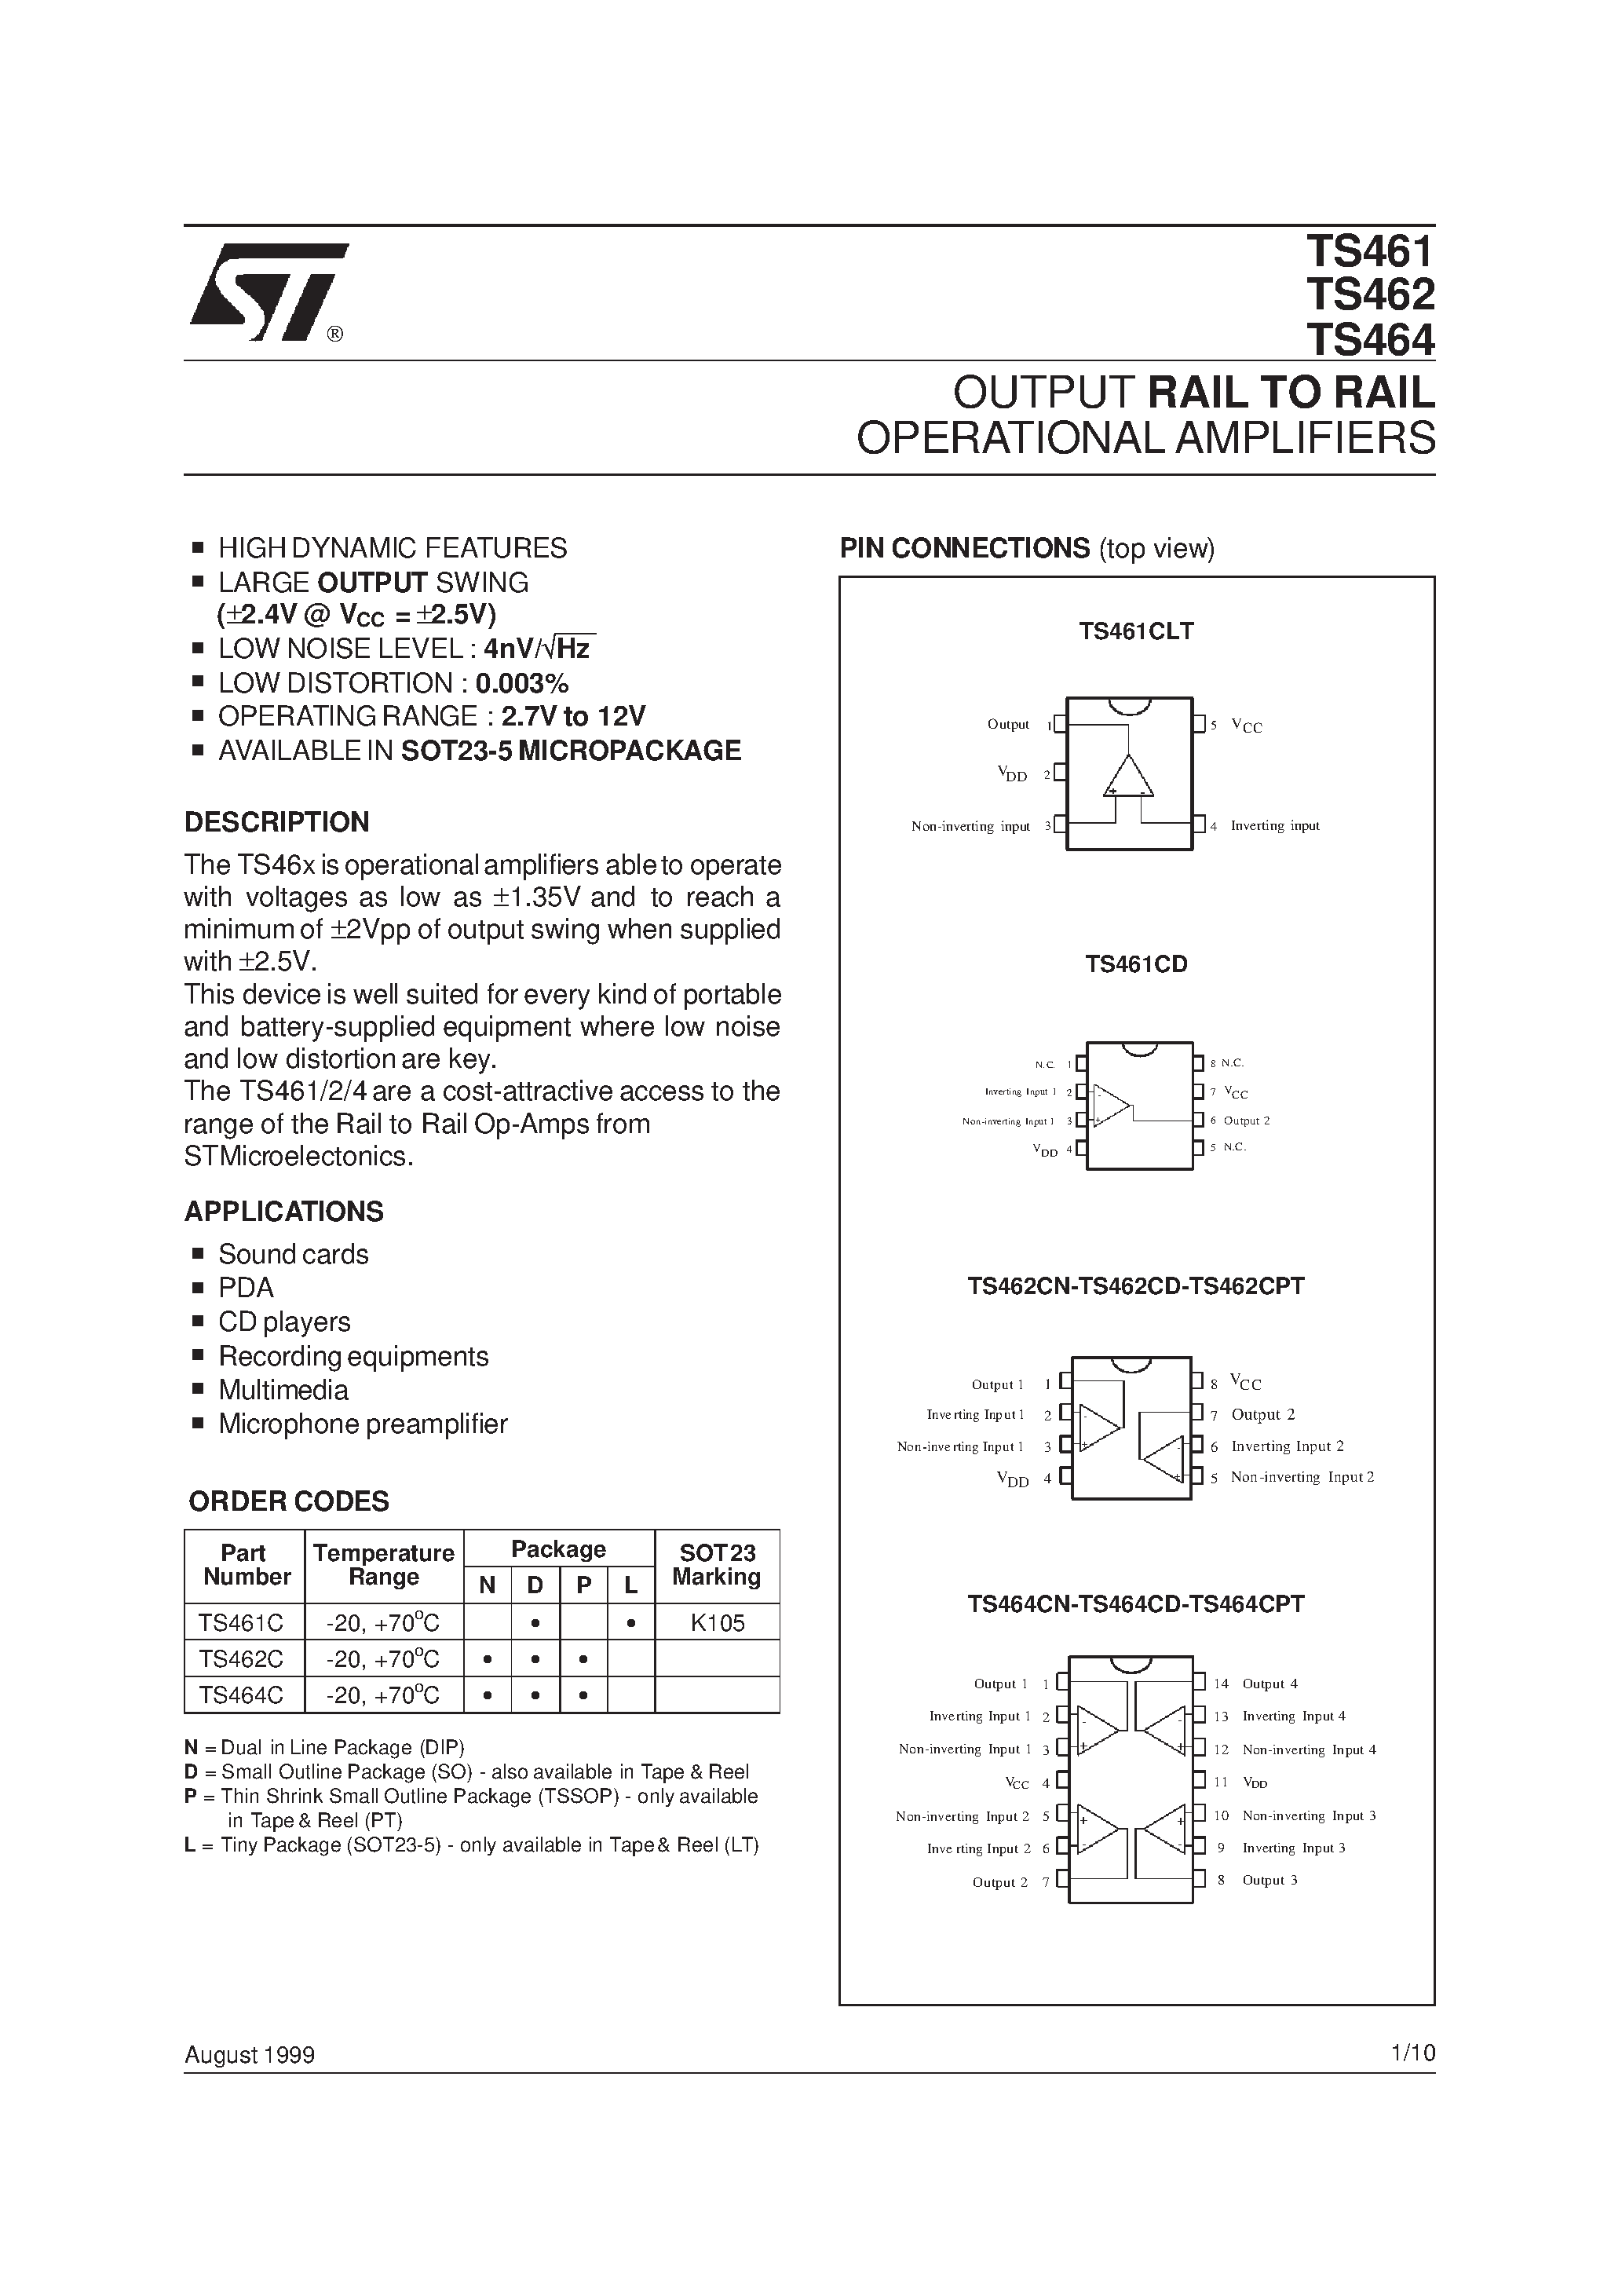 Datasheet TS461CLT - OUTPUT RAIL TO RAIL OPERATIONAL AMPLIFIERS page 1